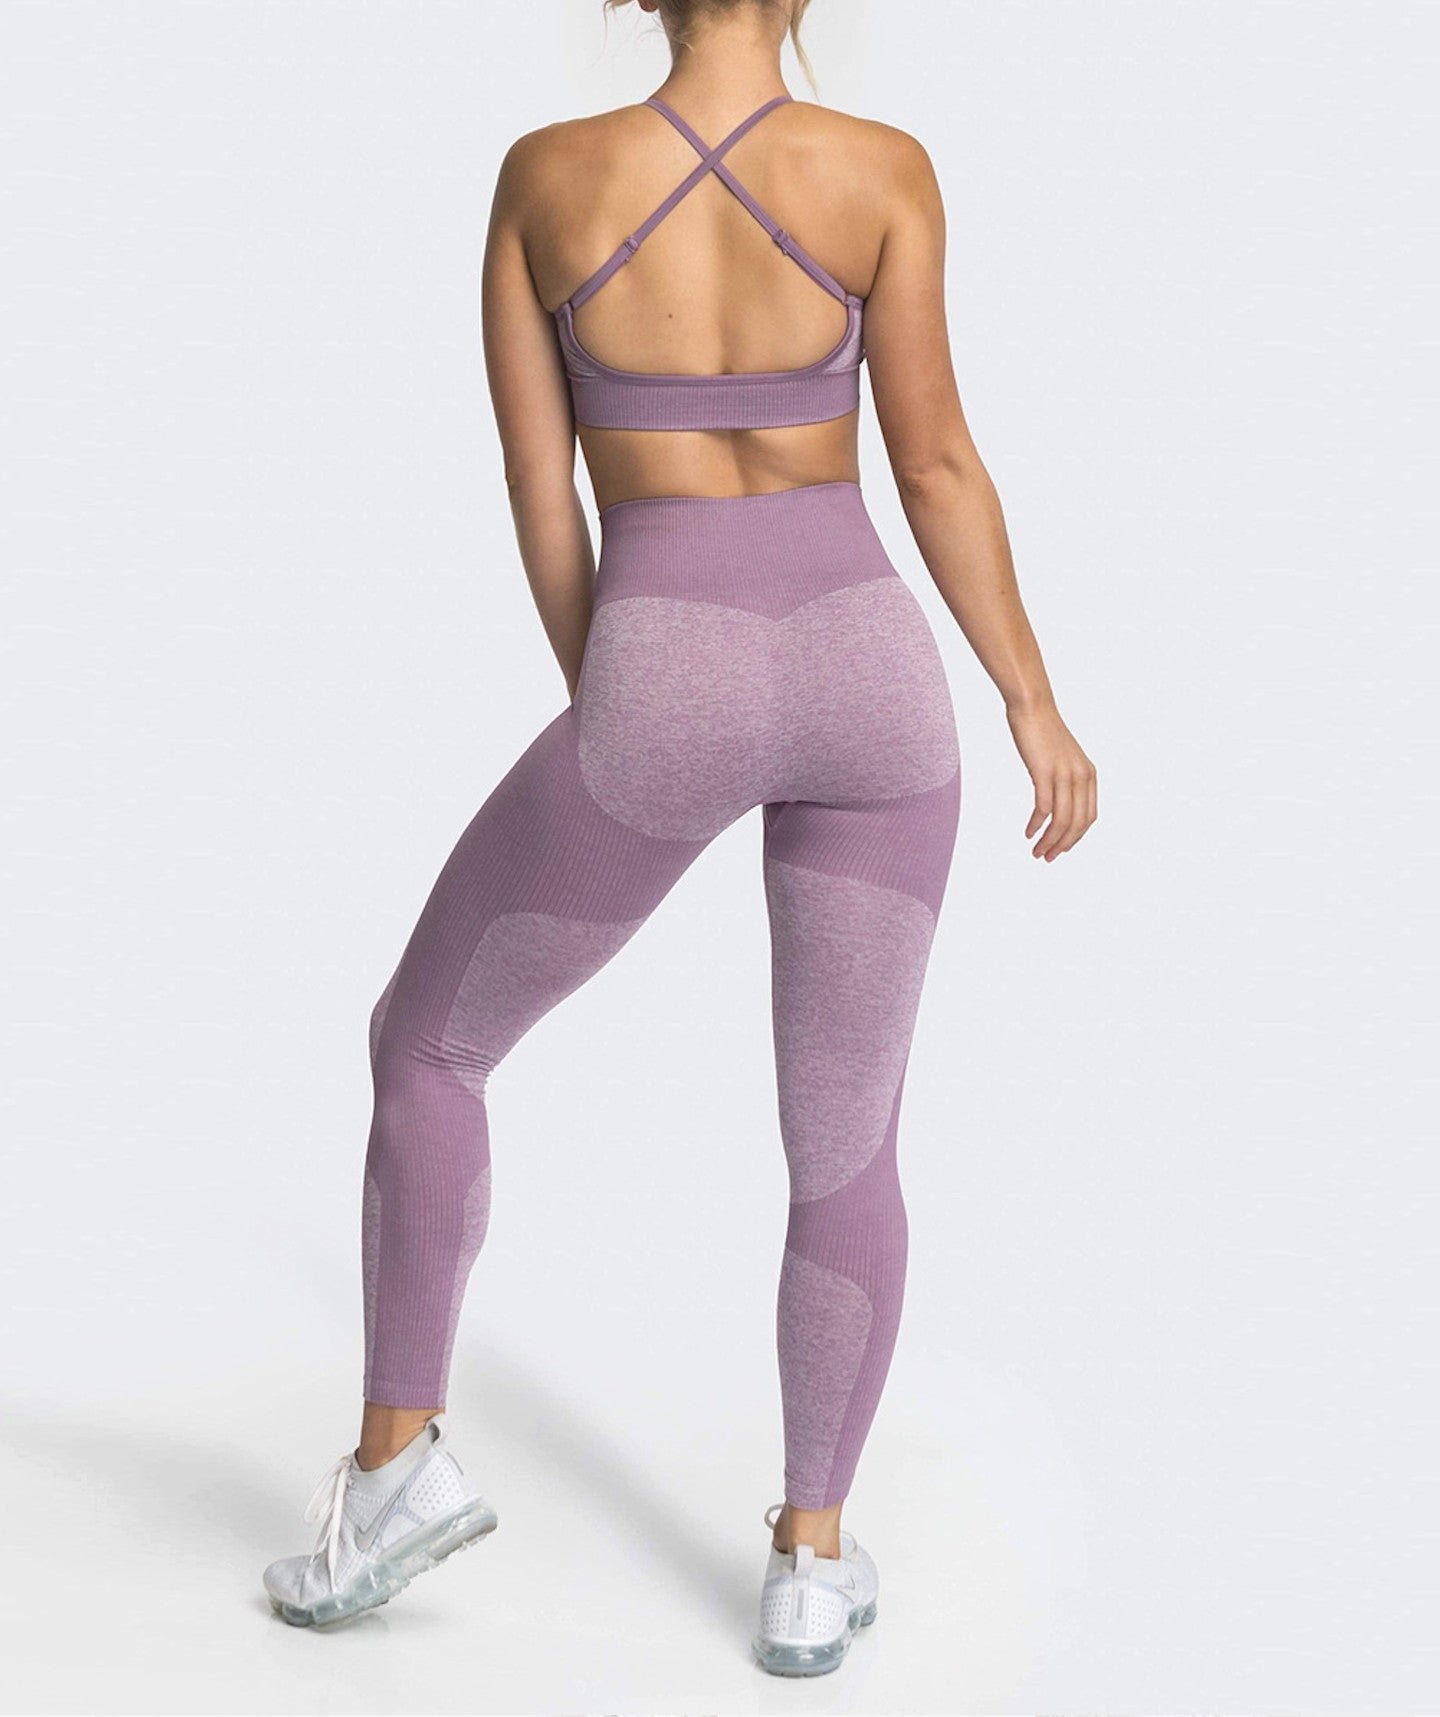 Flair Fitness Set Cross Back Sports Bra with Adjustable Straps in Mauve